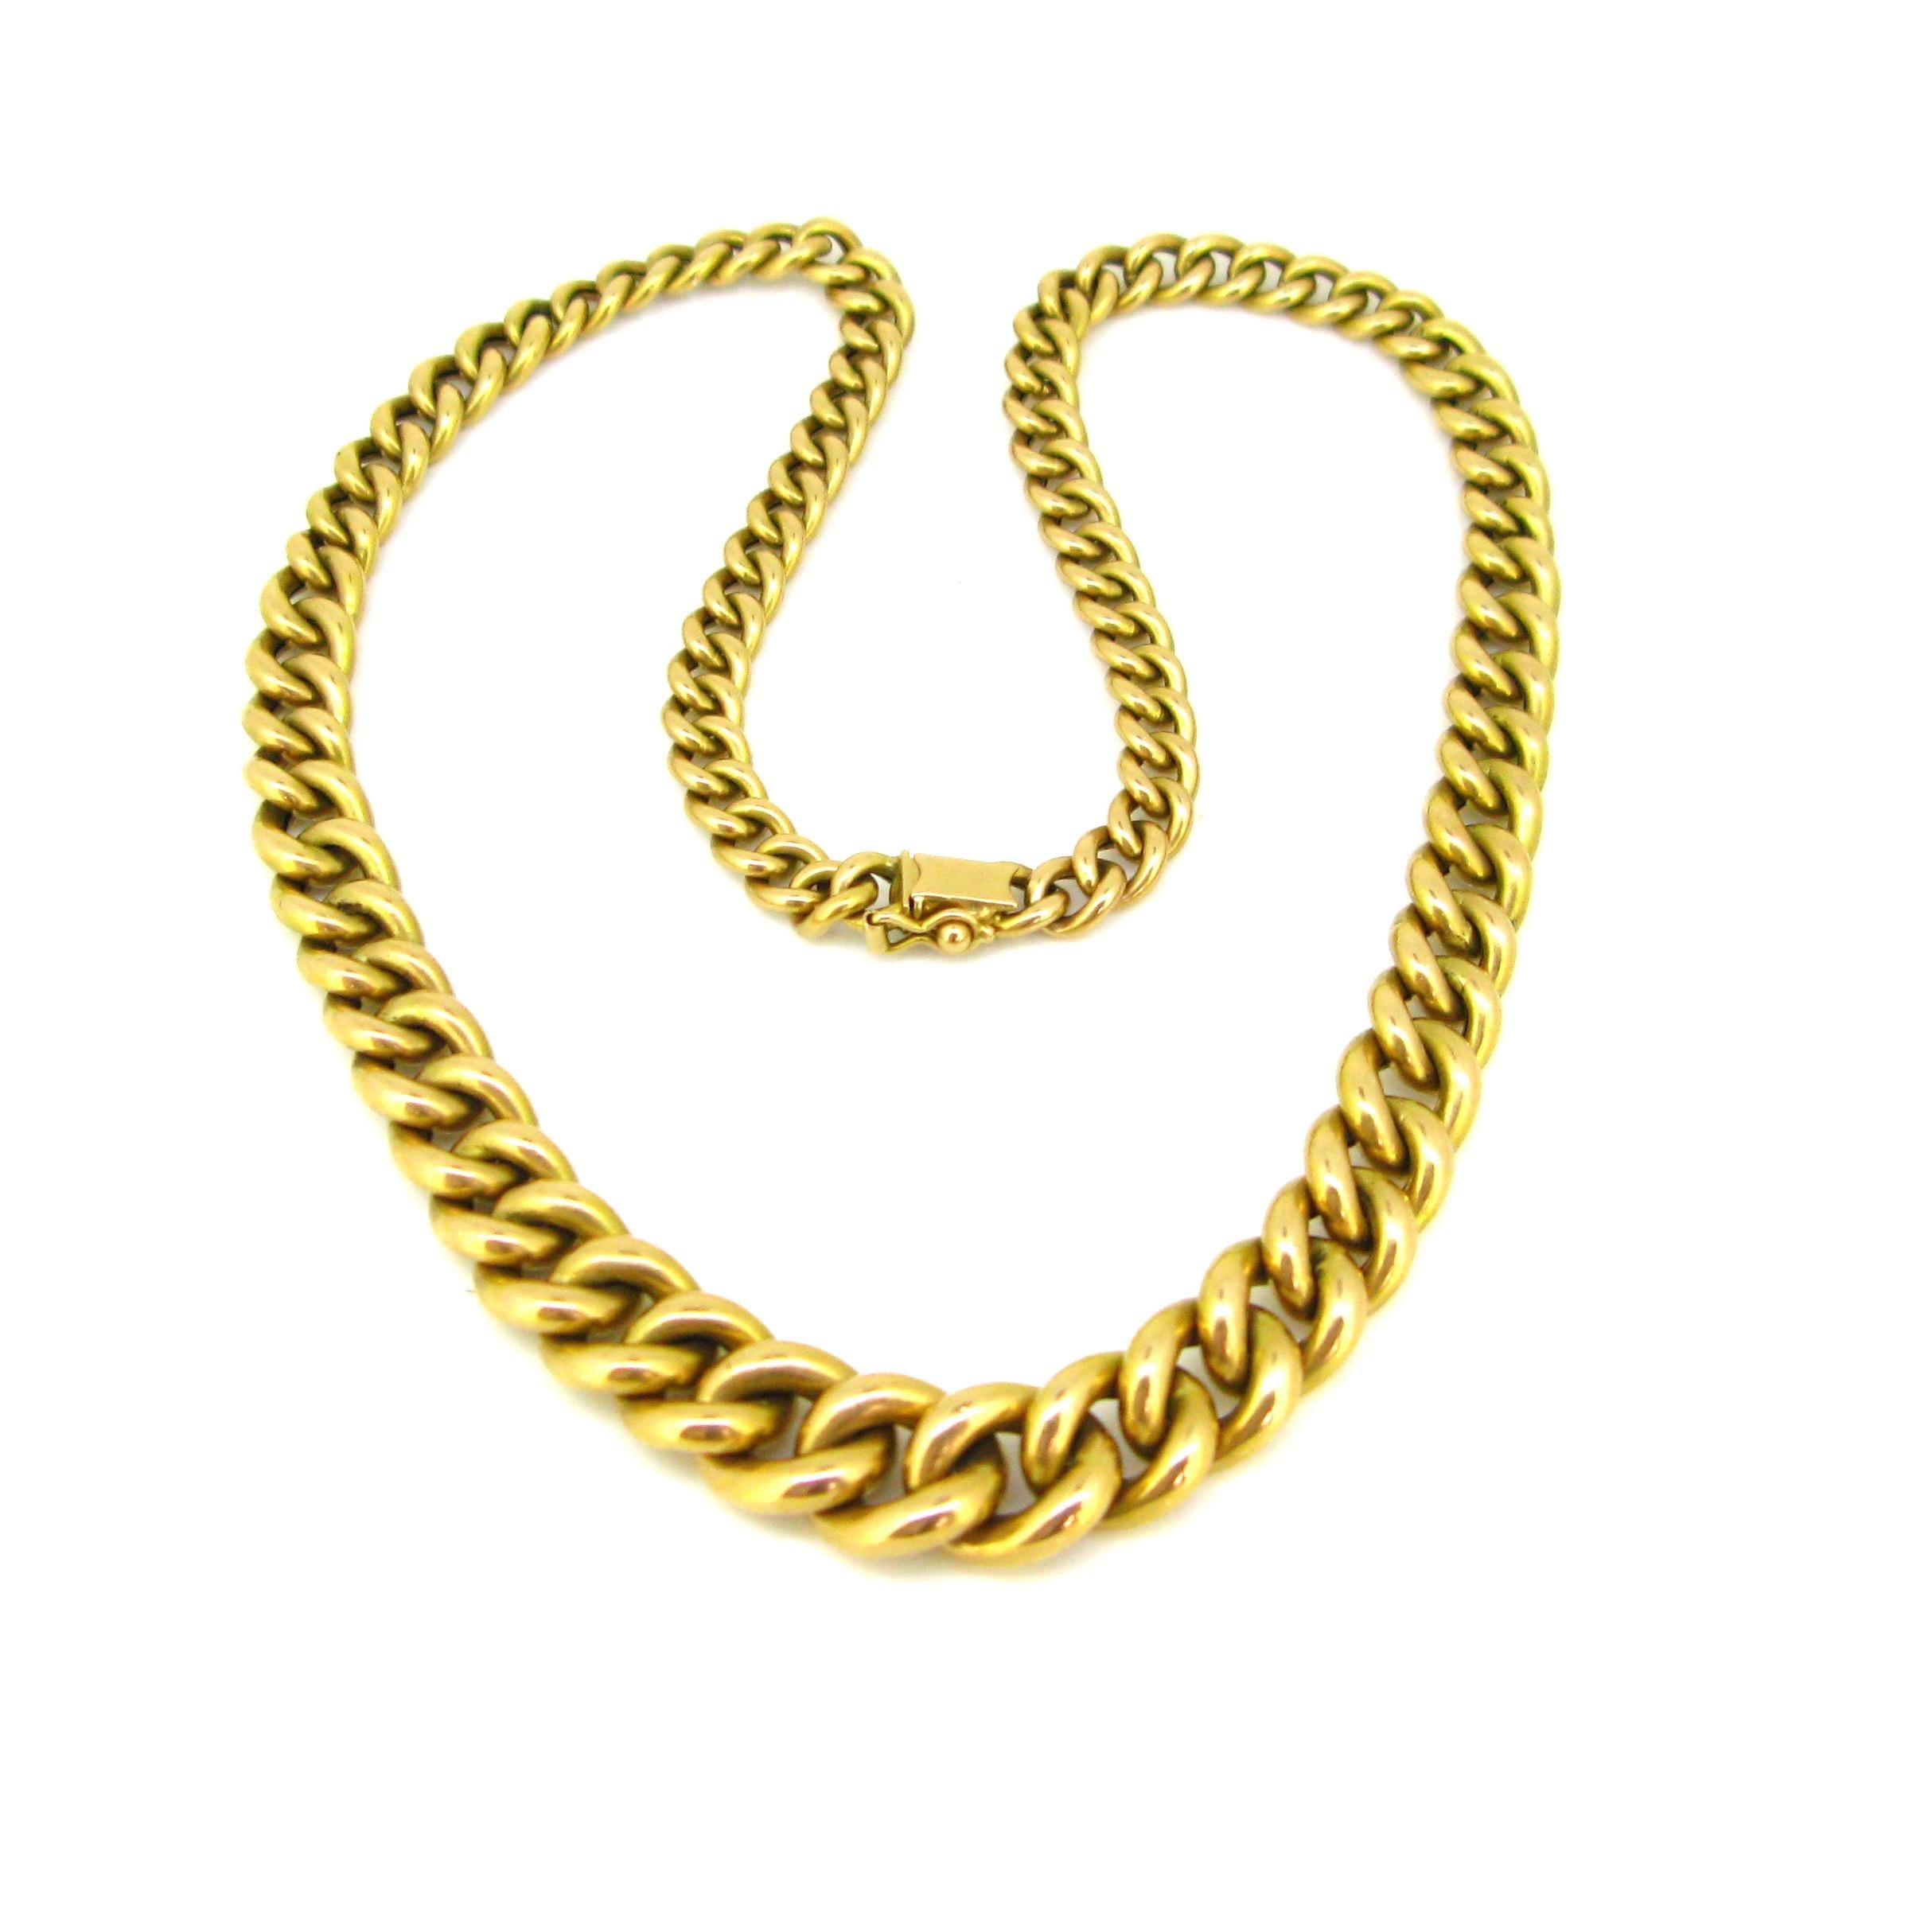 Retro Chunky Graduated Curb Links Yellow Gold Necklace